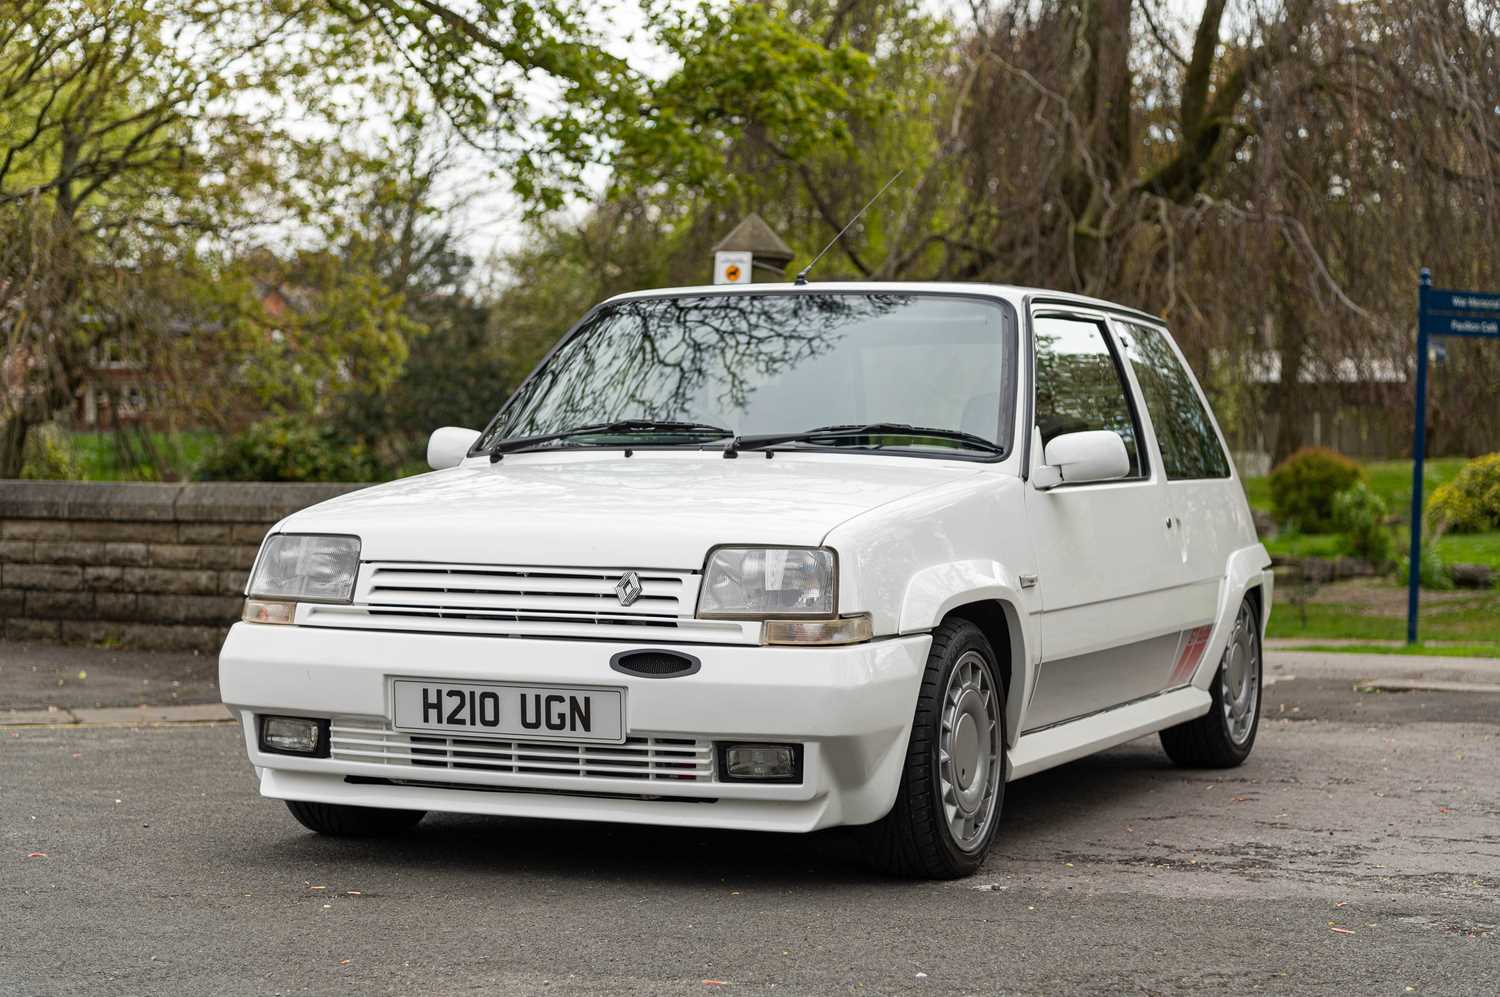 1990 Renault 5 GT Turbo - Image 4 of 79